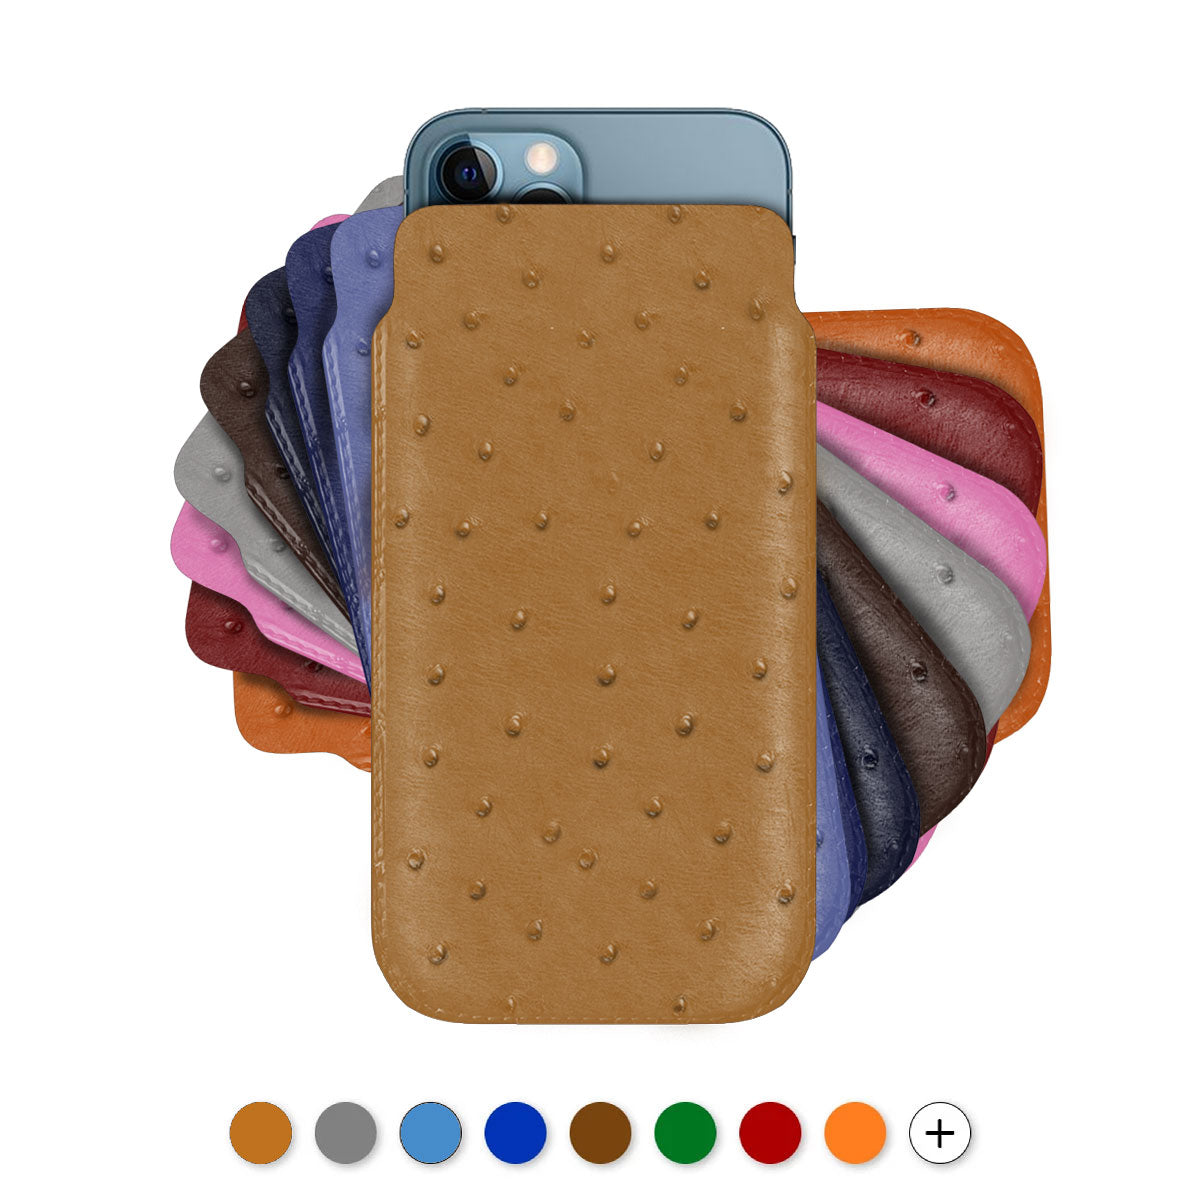 iPhone leather pouch case / slip case - iPhone 12 & 11 ( Pro / Max / Mini ) - Ostrich leather